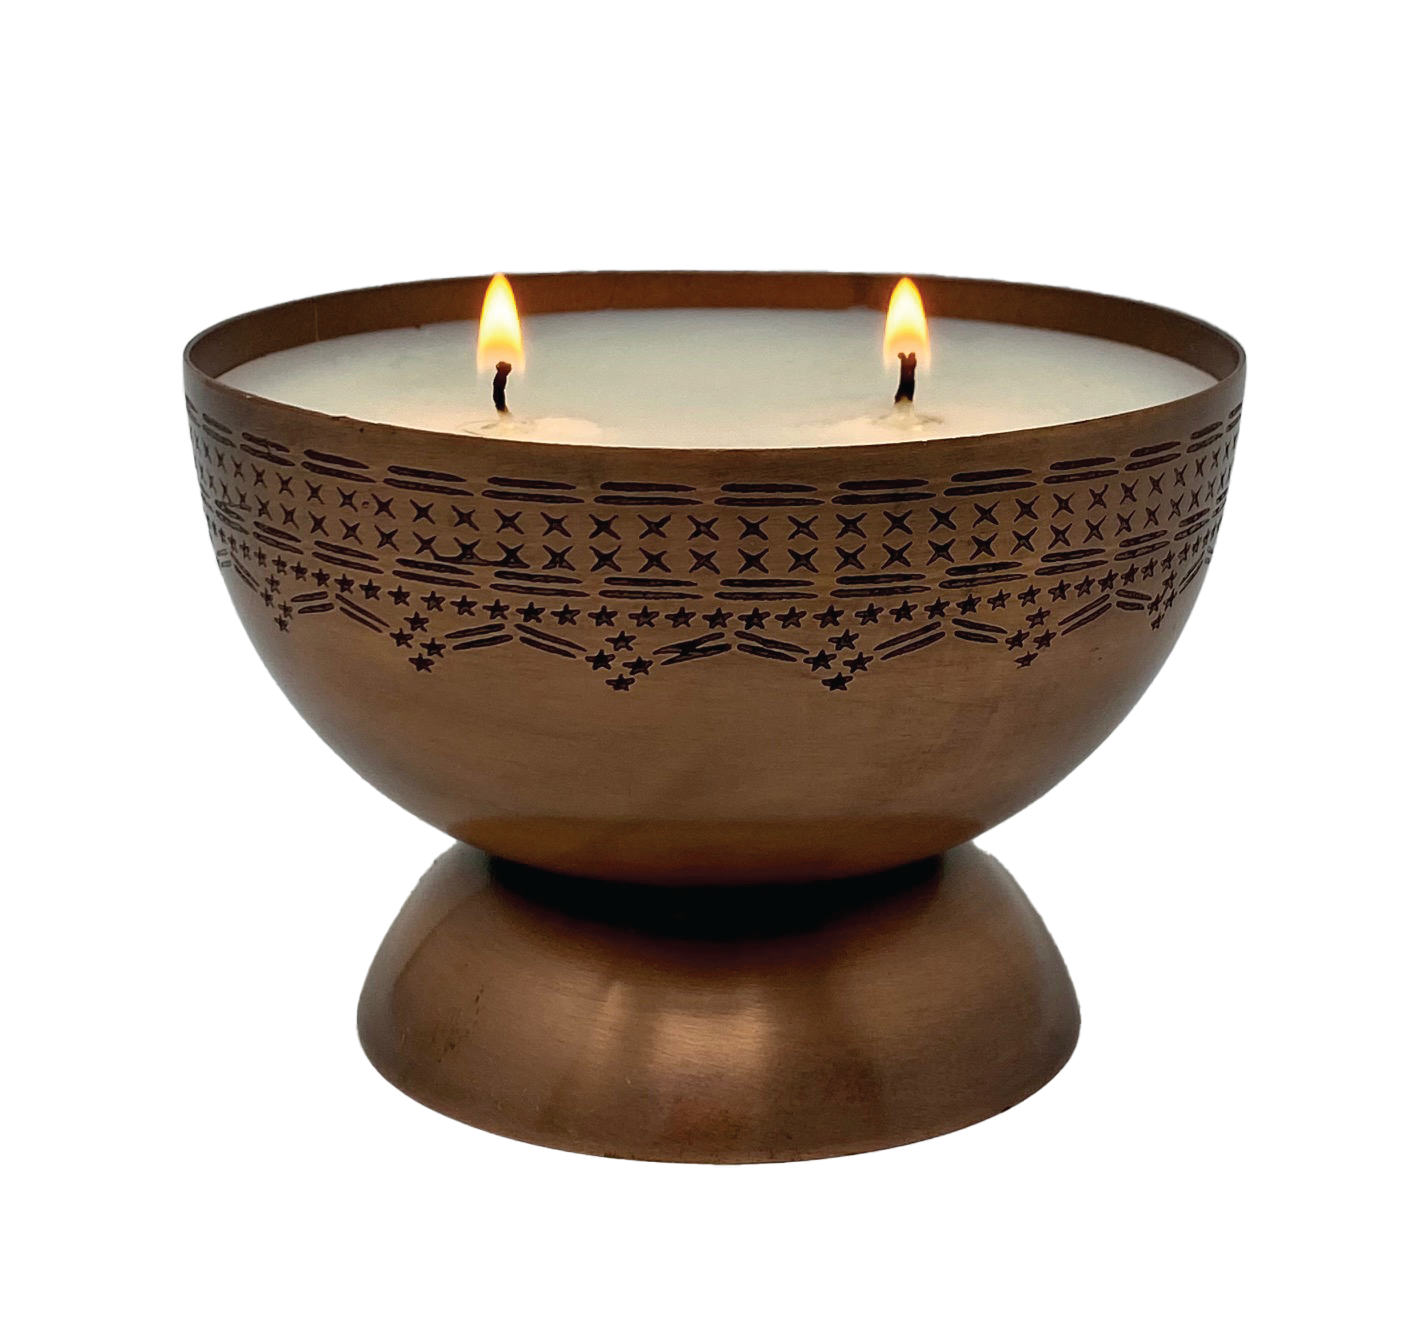 Tranquility Candle Bowl - Himalayan Trading Post